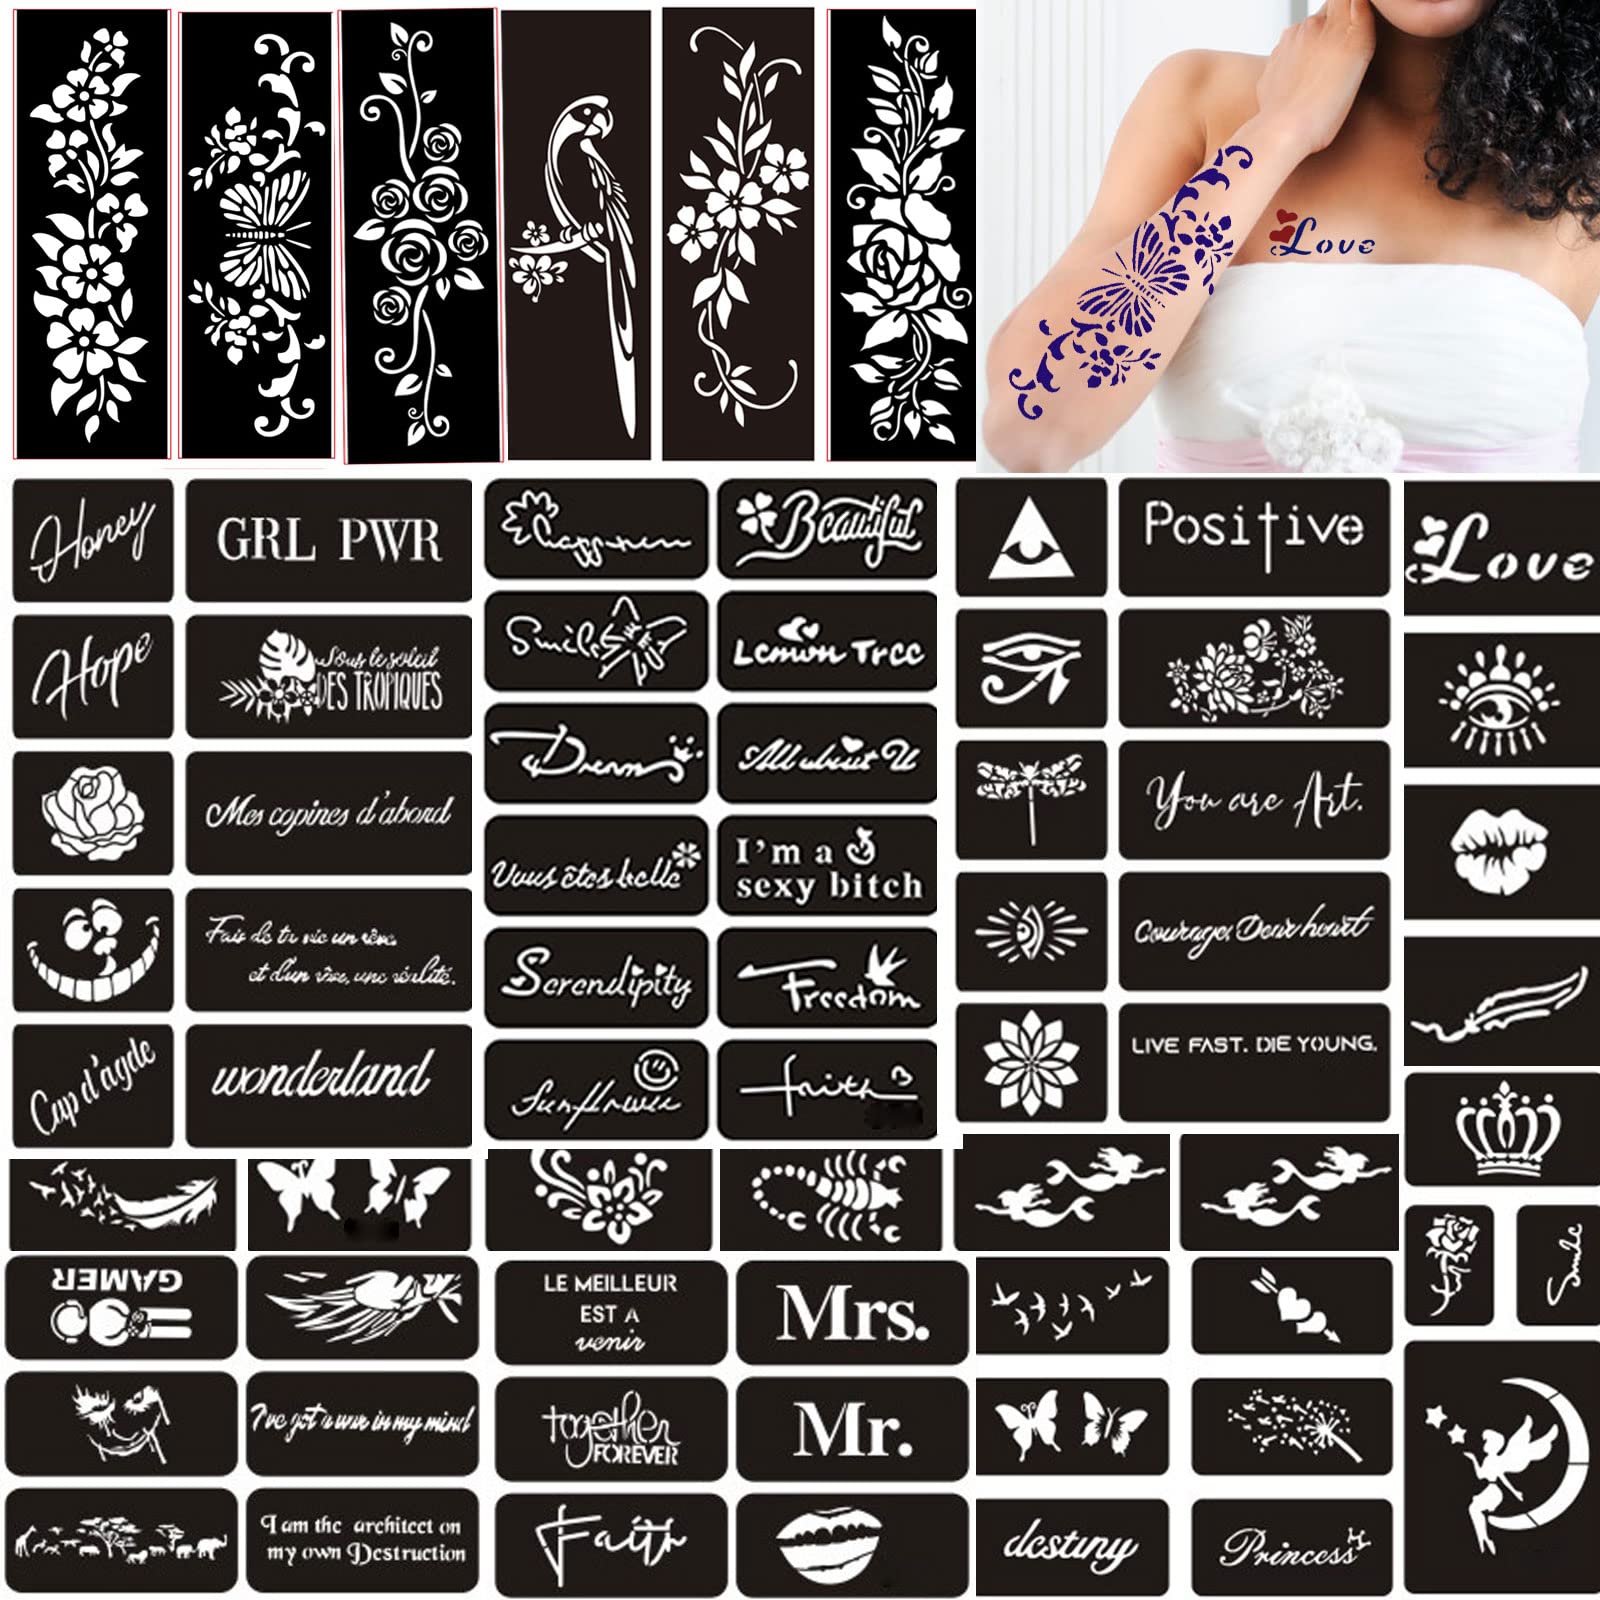  20 Sheets Henna Tattoo Stencils Kit, Temporary Tattoo  Templates Indian Arabian Tattoo Stickers for Women and Girls Glitter Henna  Stencil for DIY Face Body Paint : Beauty & Personal Care